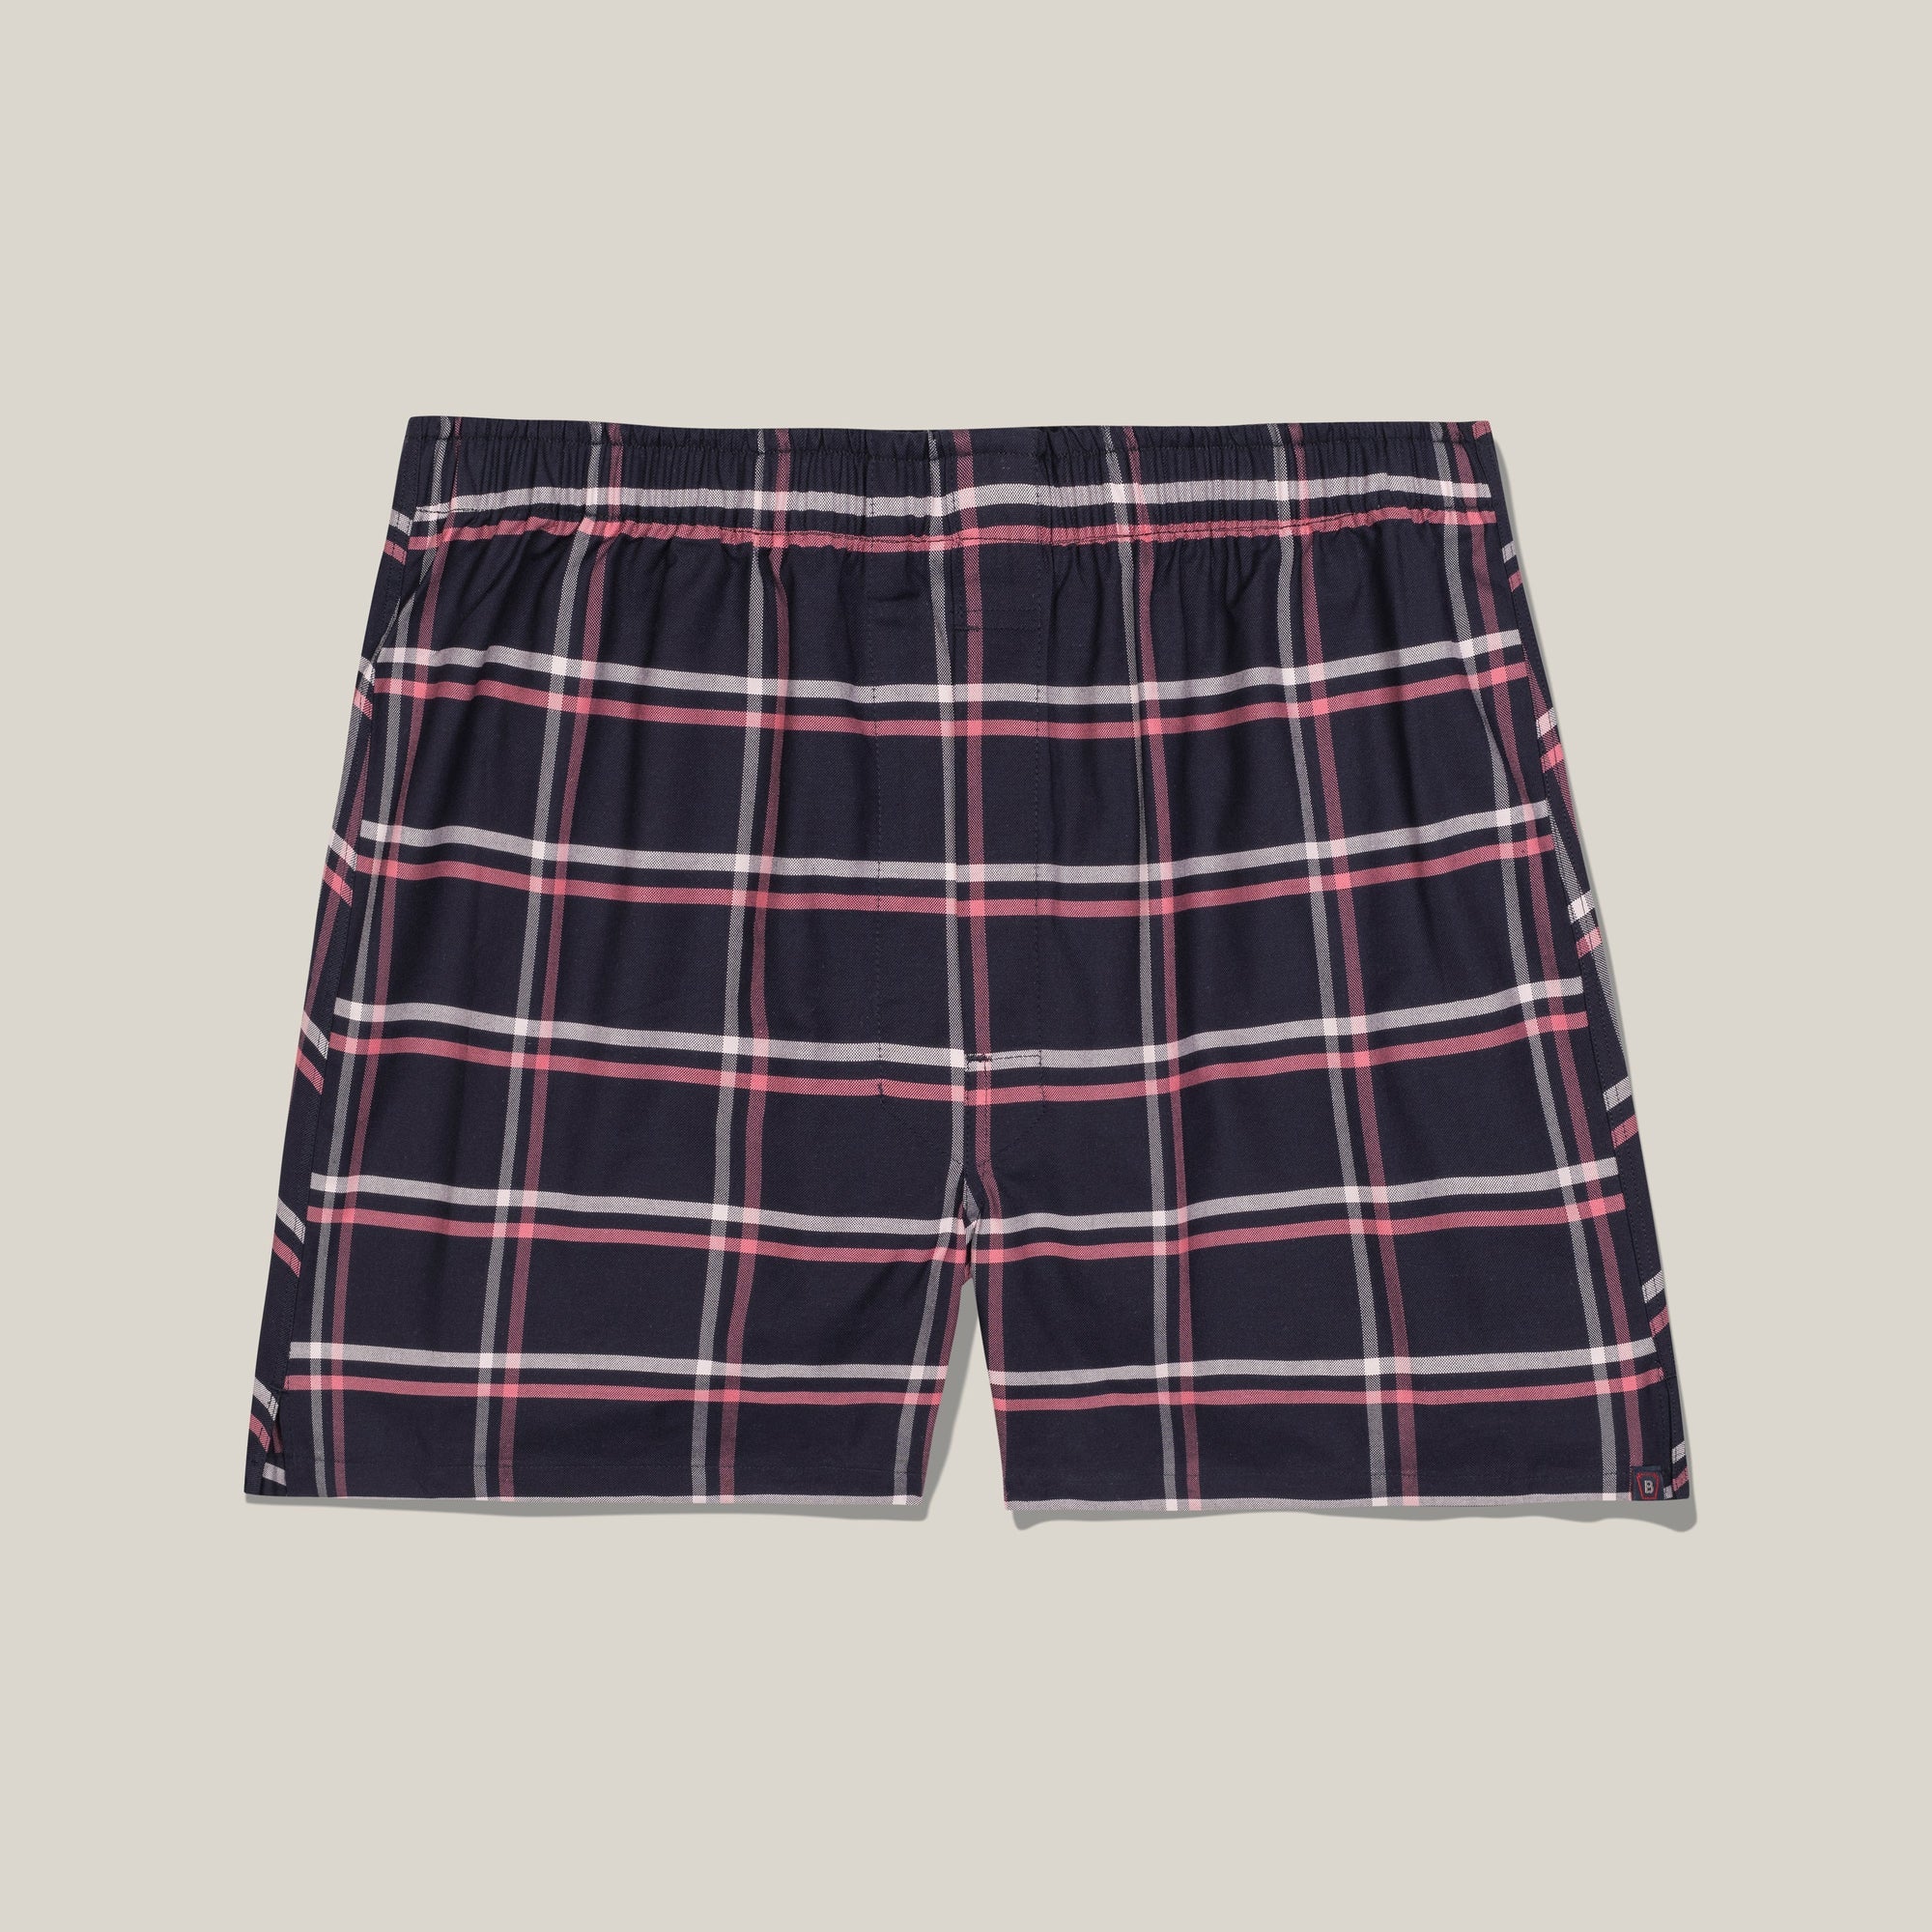 Plaid Cotton Poplin Boxer in Navy and Pink (Size XX-Large) by Bills Khakis